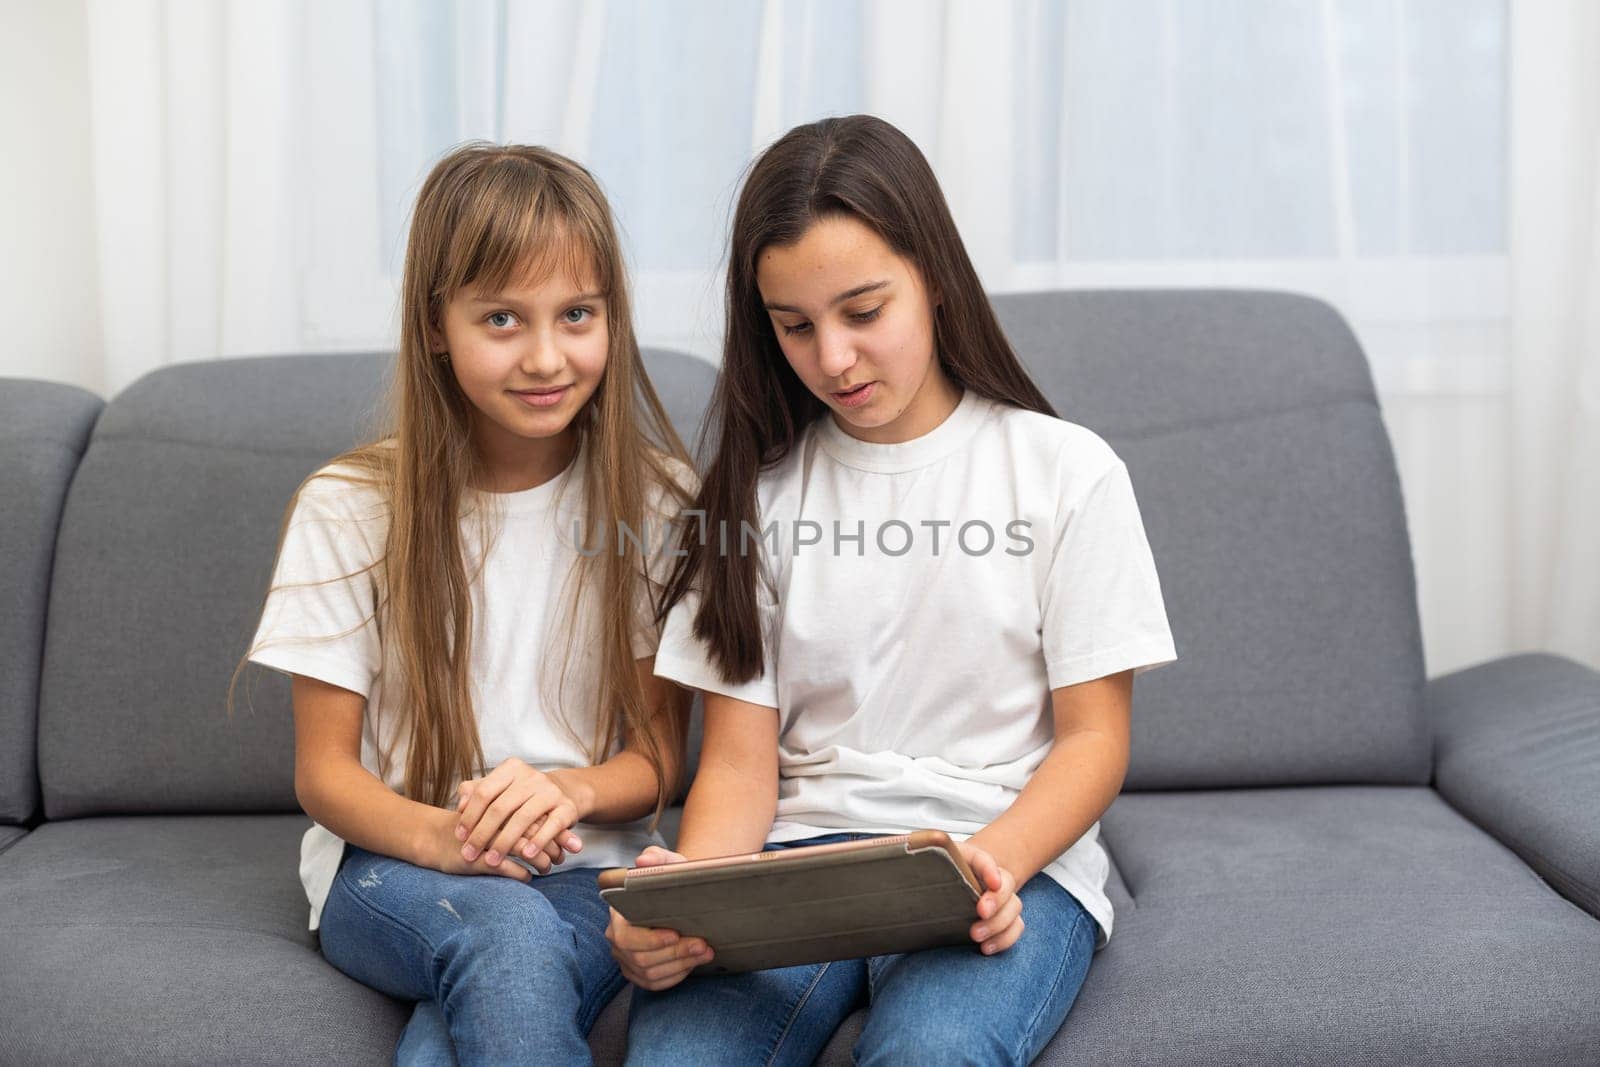 Cute little girl and older sister playing together smiling and having bonding time using a laptop on couch at home. Happy family Siblings relationship and digital technology lifestyle concept. by Andelov13